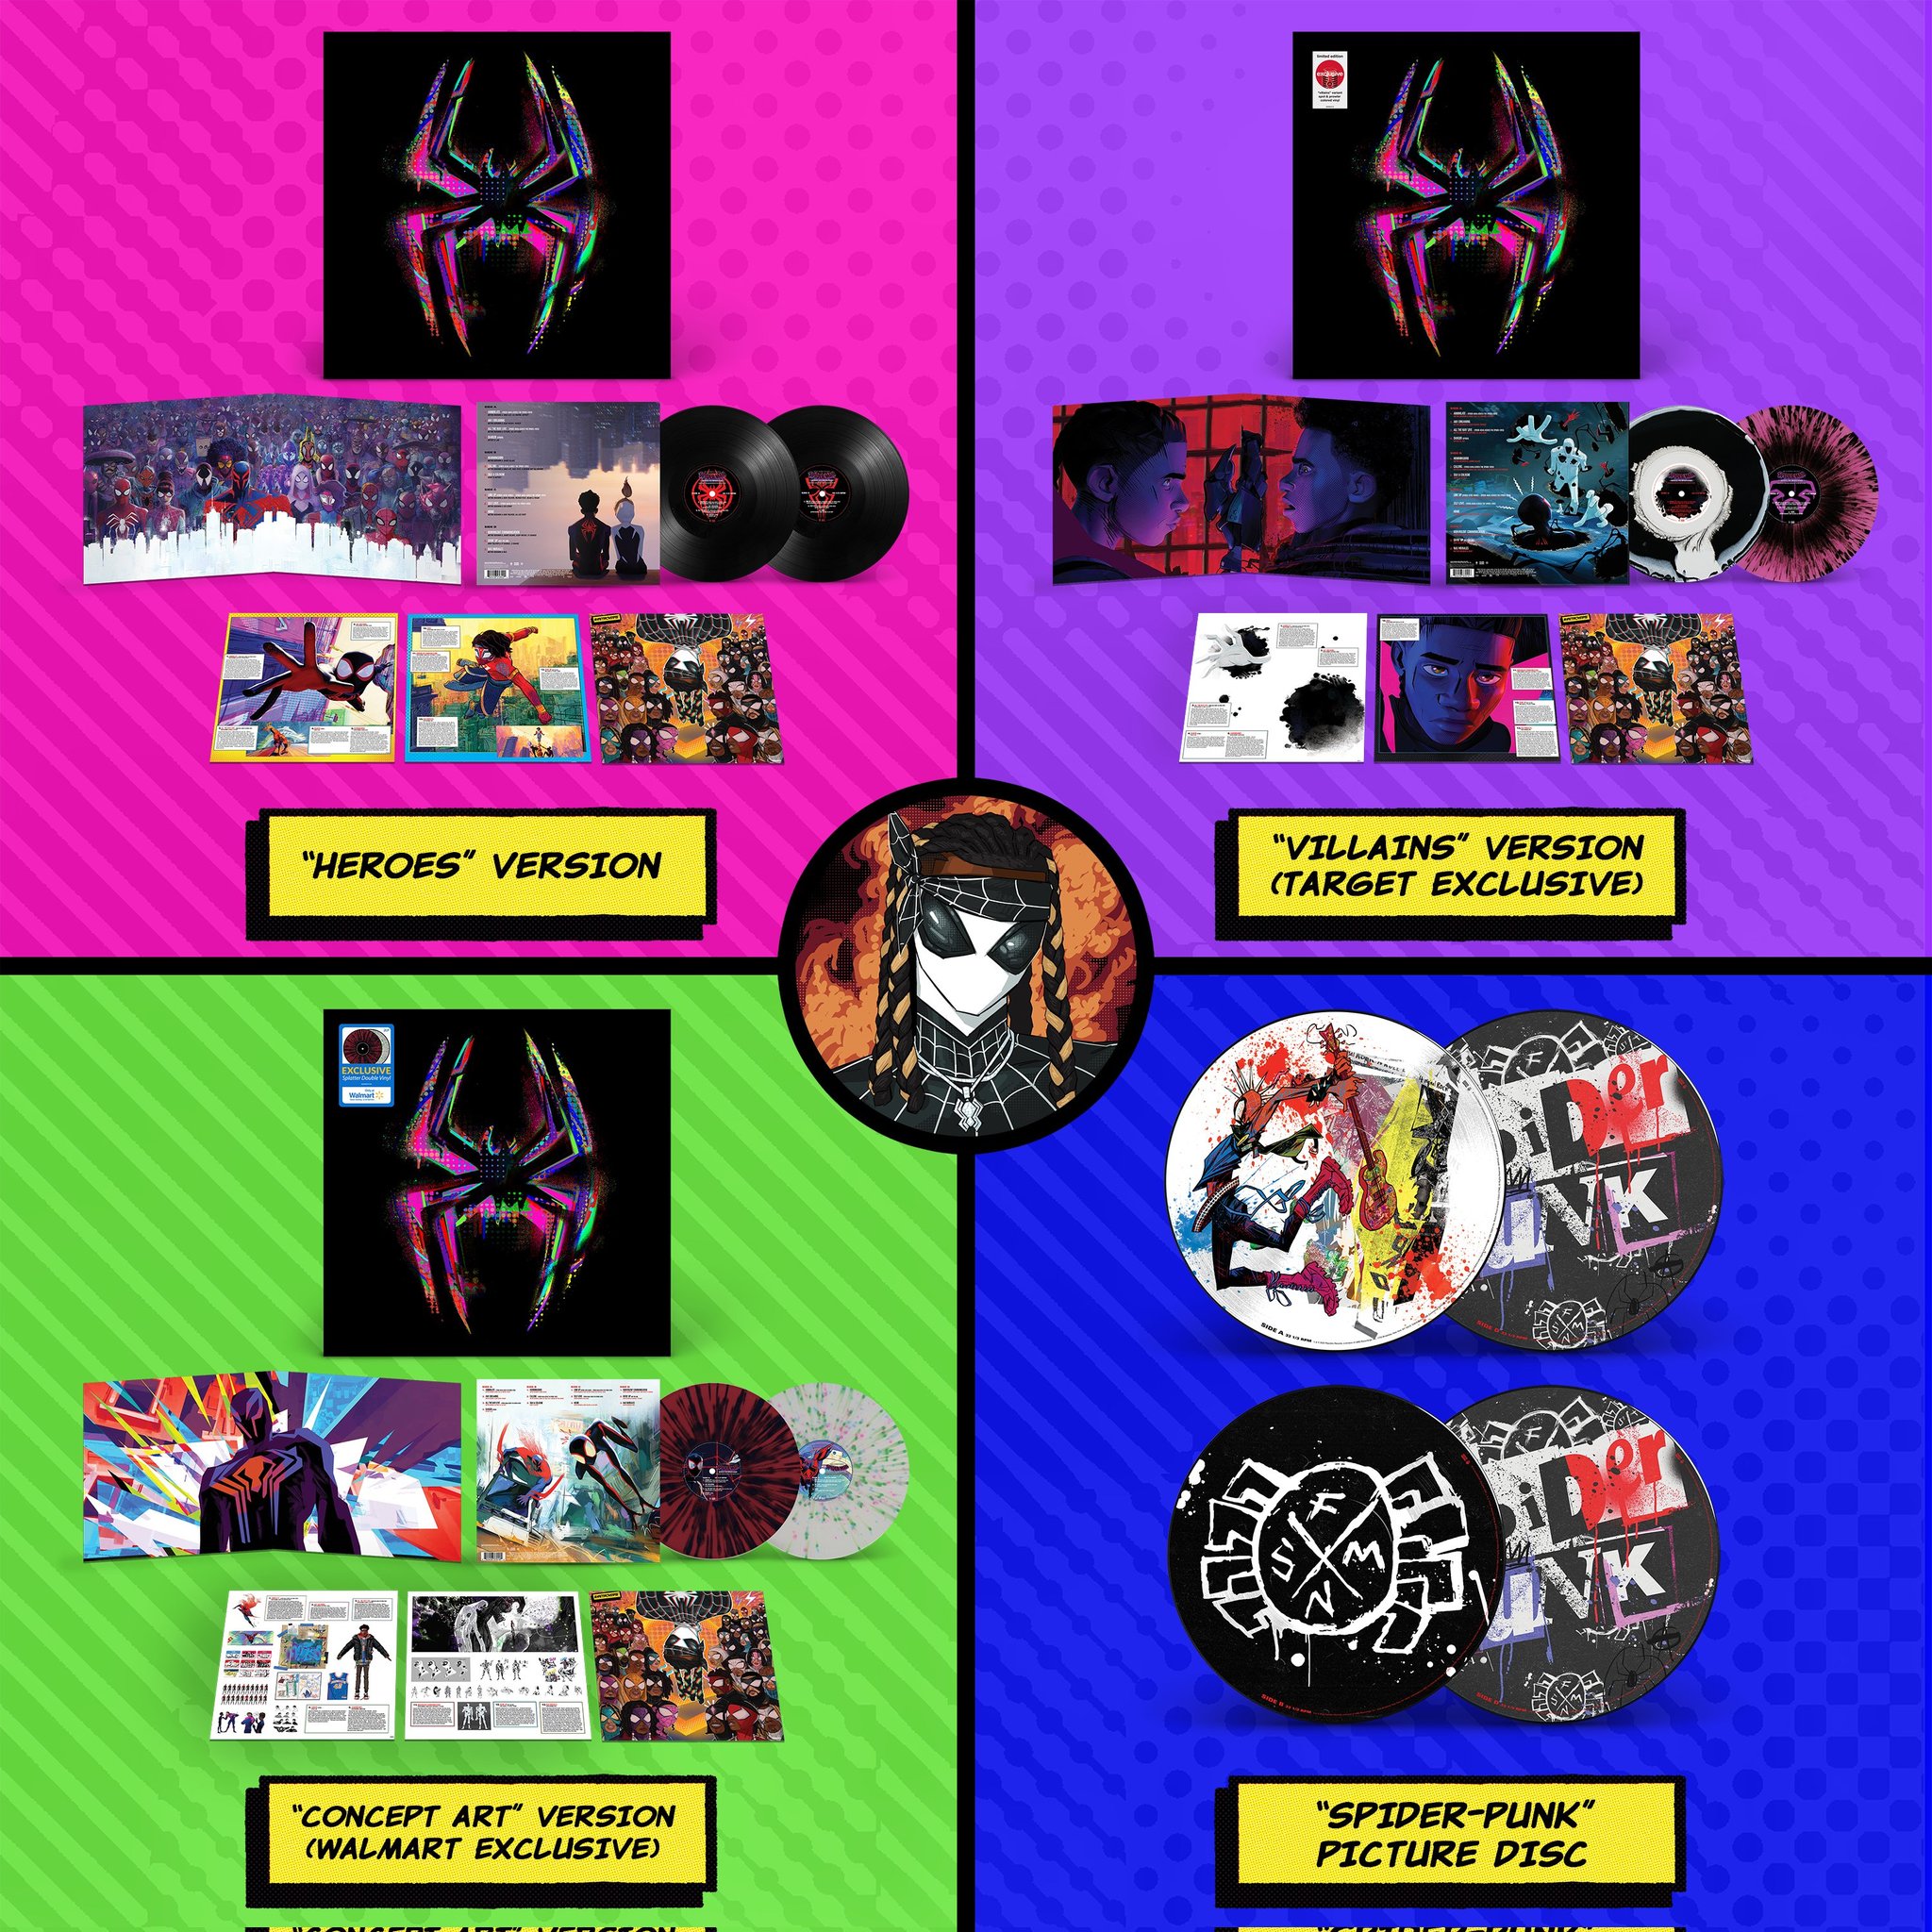 Spider-Man News on X: Metro boomin Across the spider-verse album will  release on vinyl on November 17th There are 4 versions of the vinyl  heroes villains concept art spider-punk picture disc   /